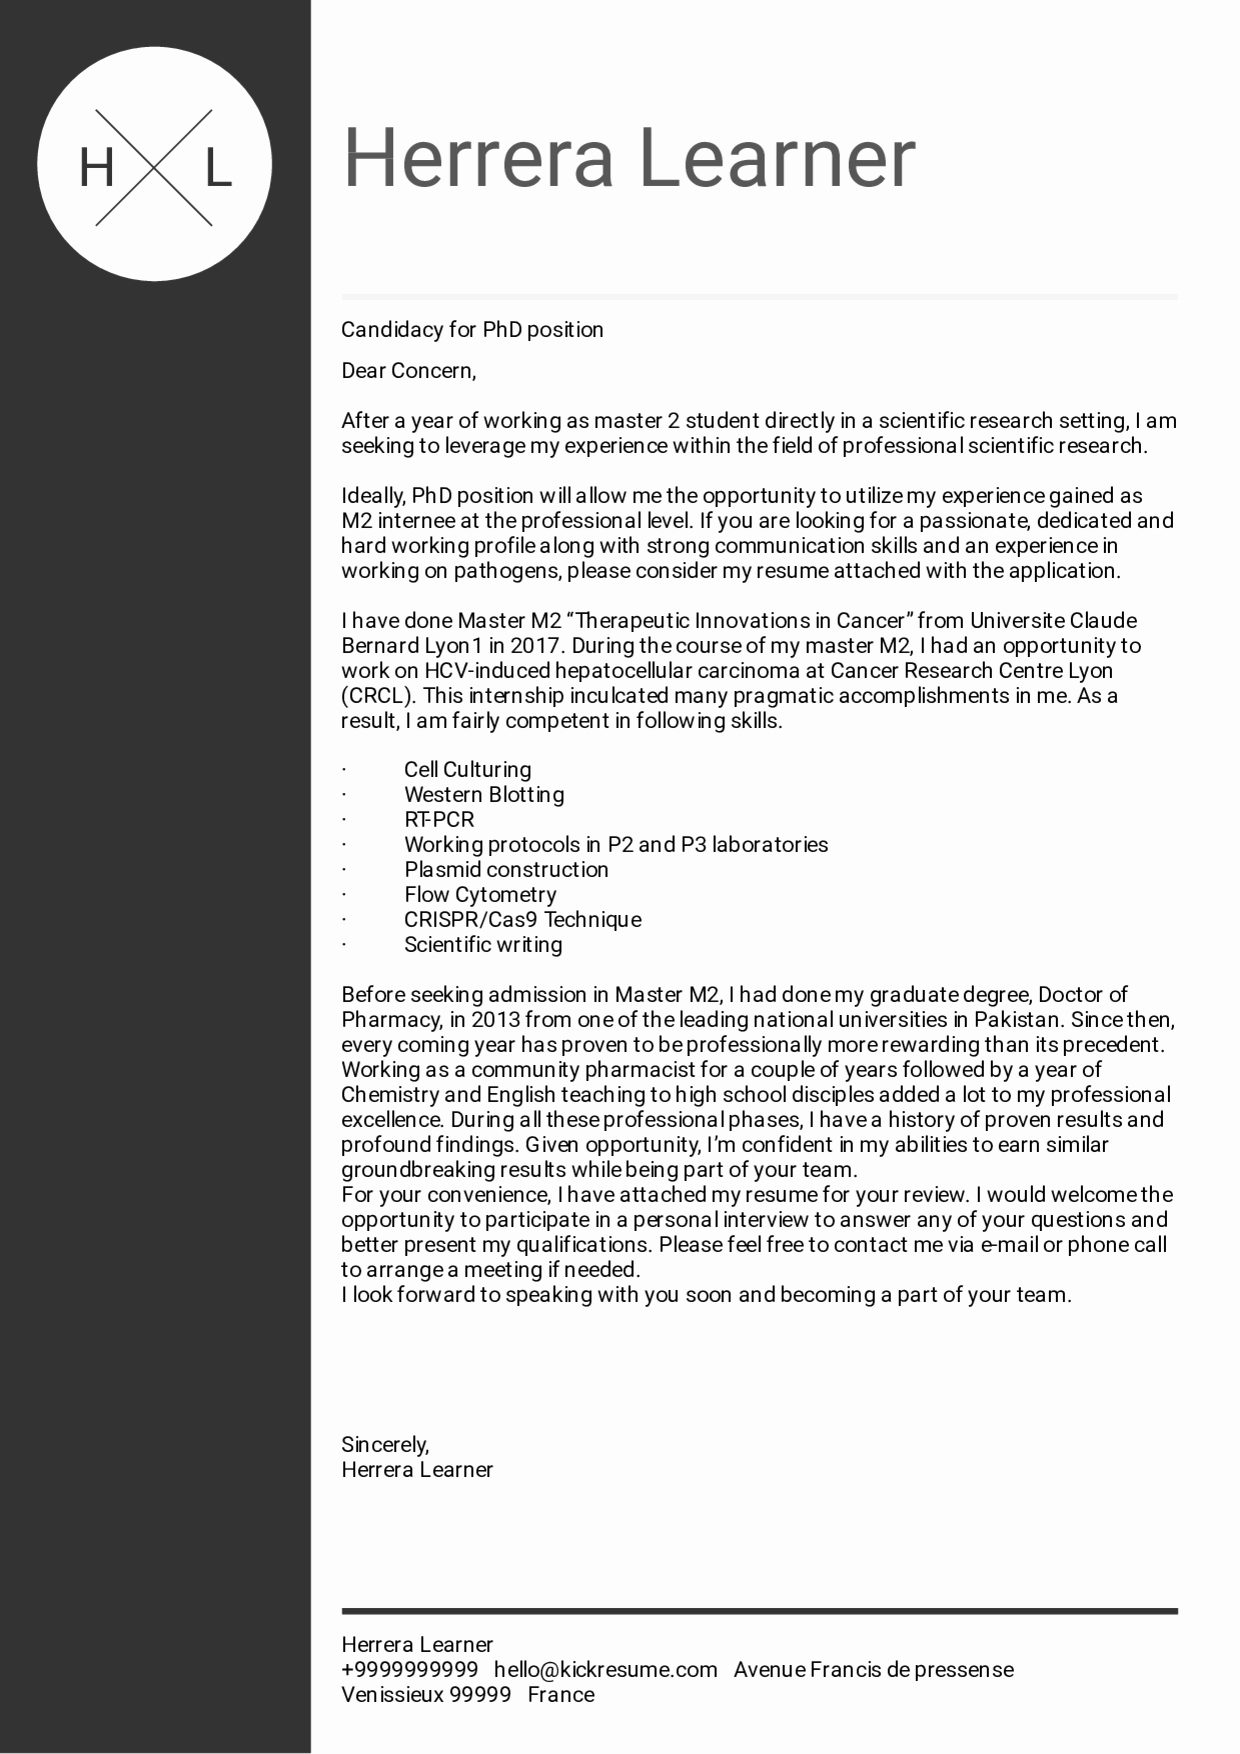 Cover Letter Examples Student Beautiful Cover Letter Examples by Real People Lyon University Phd